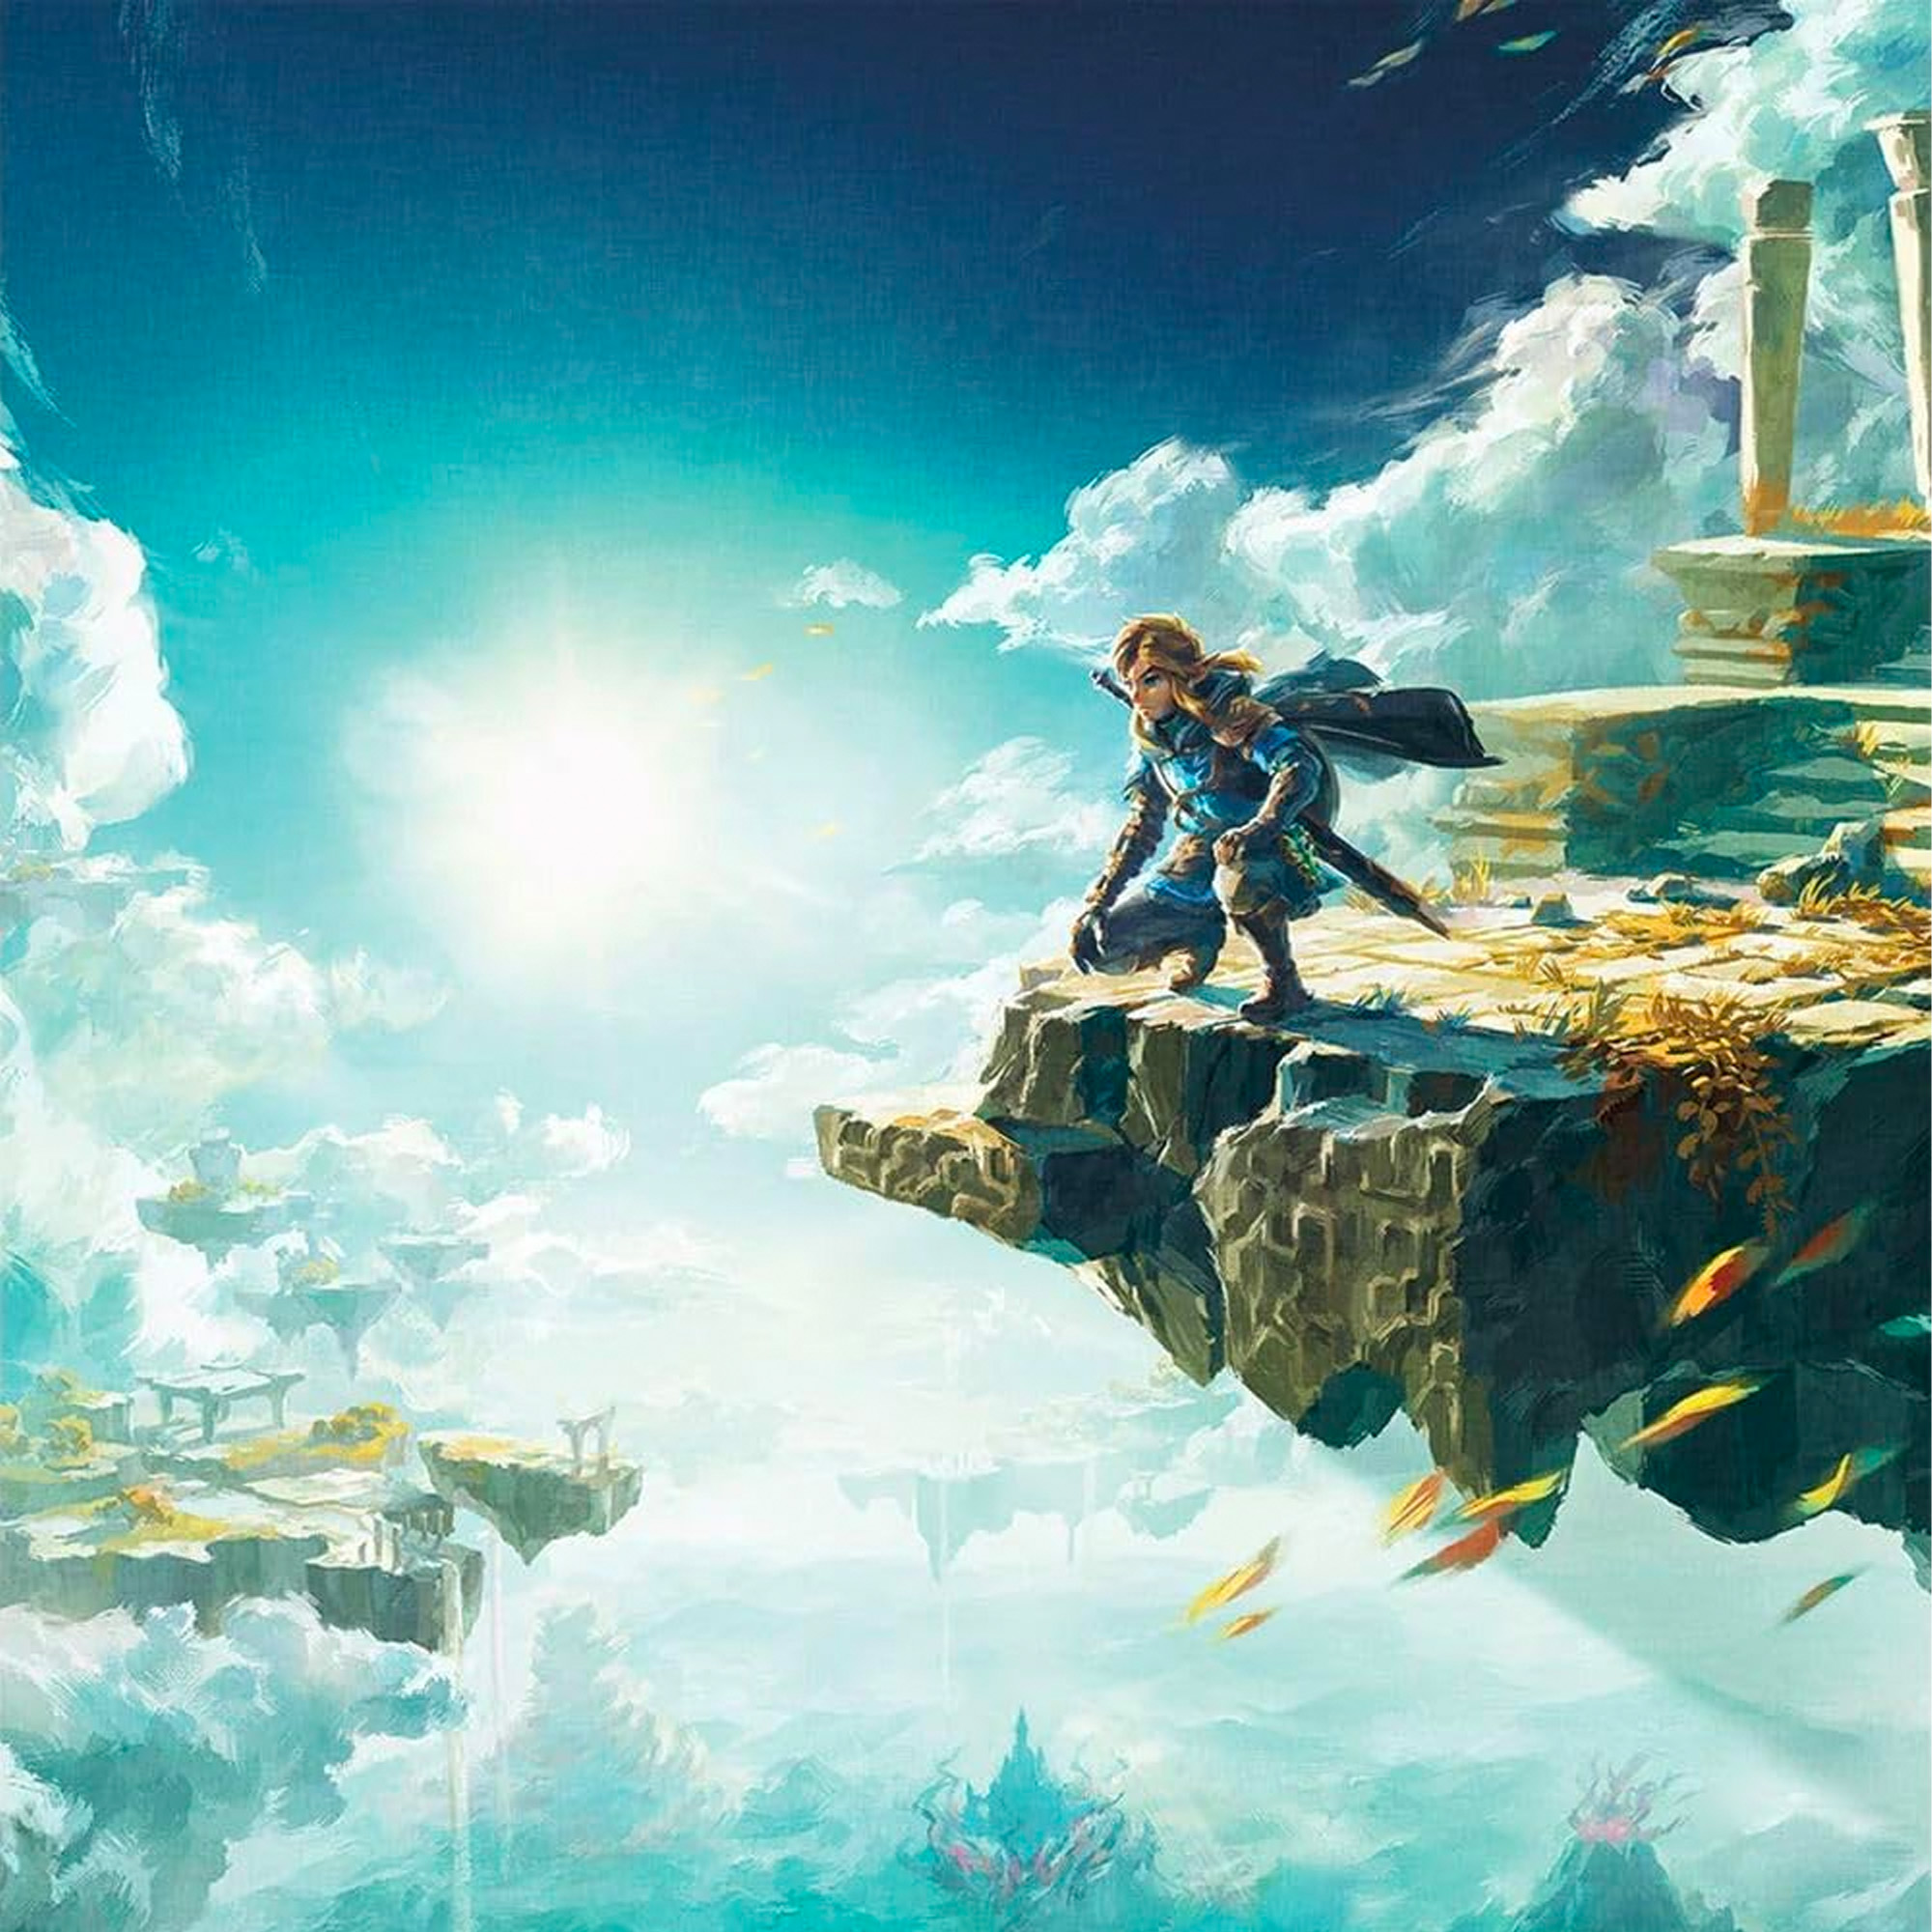 Tears of the Kingdom Maxi Poster - The Legend of Zelda